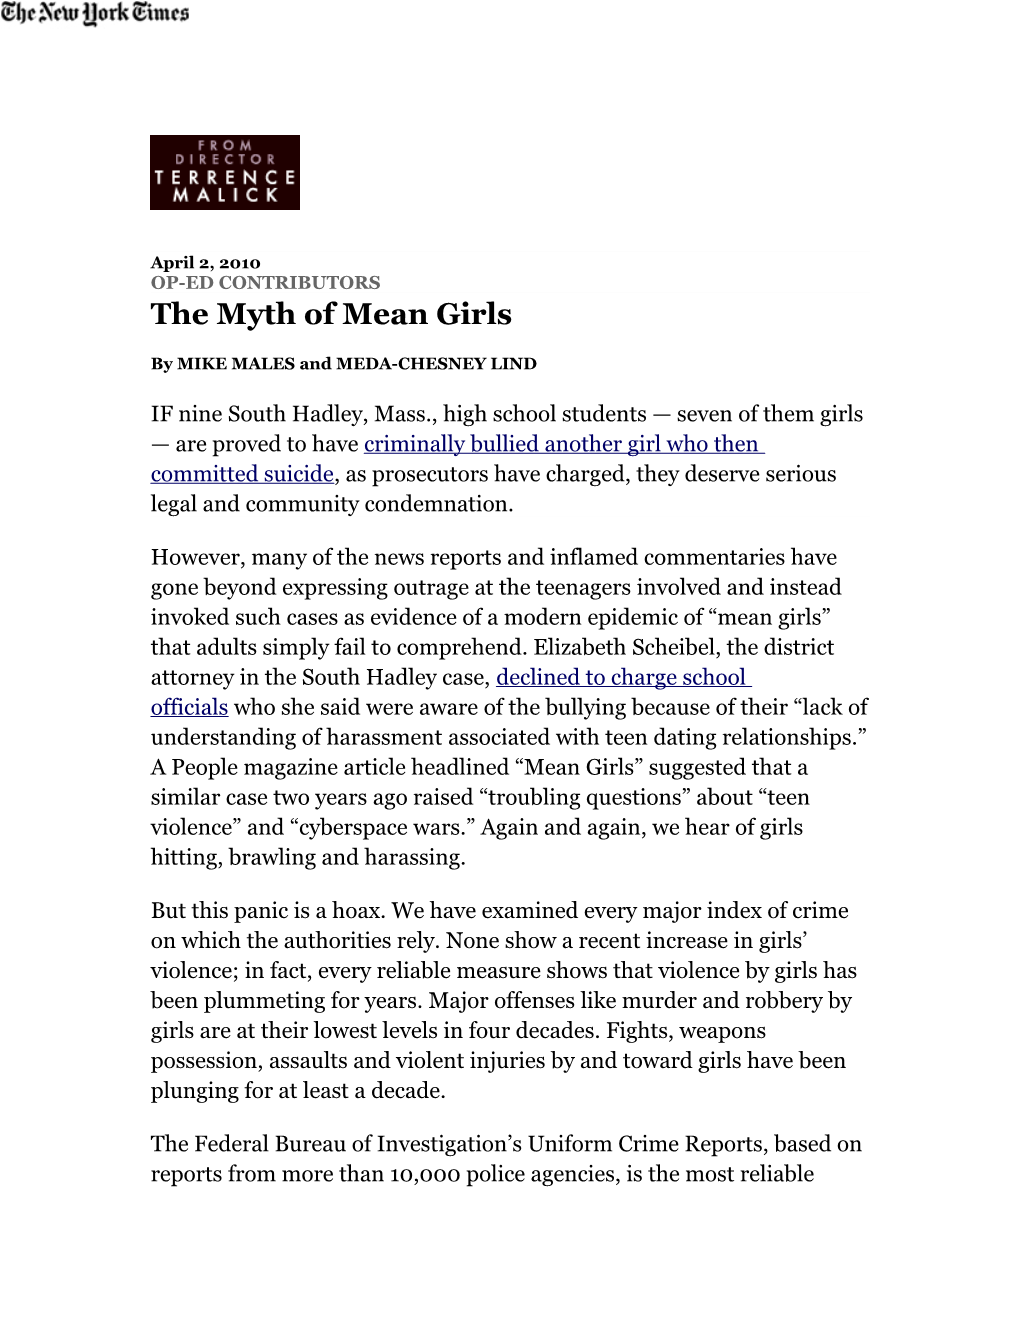 The Myth of Mean Girls